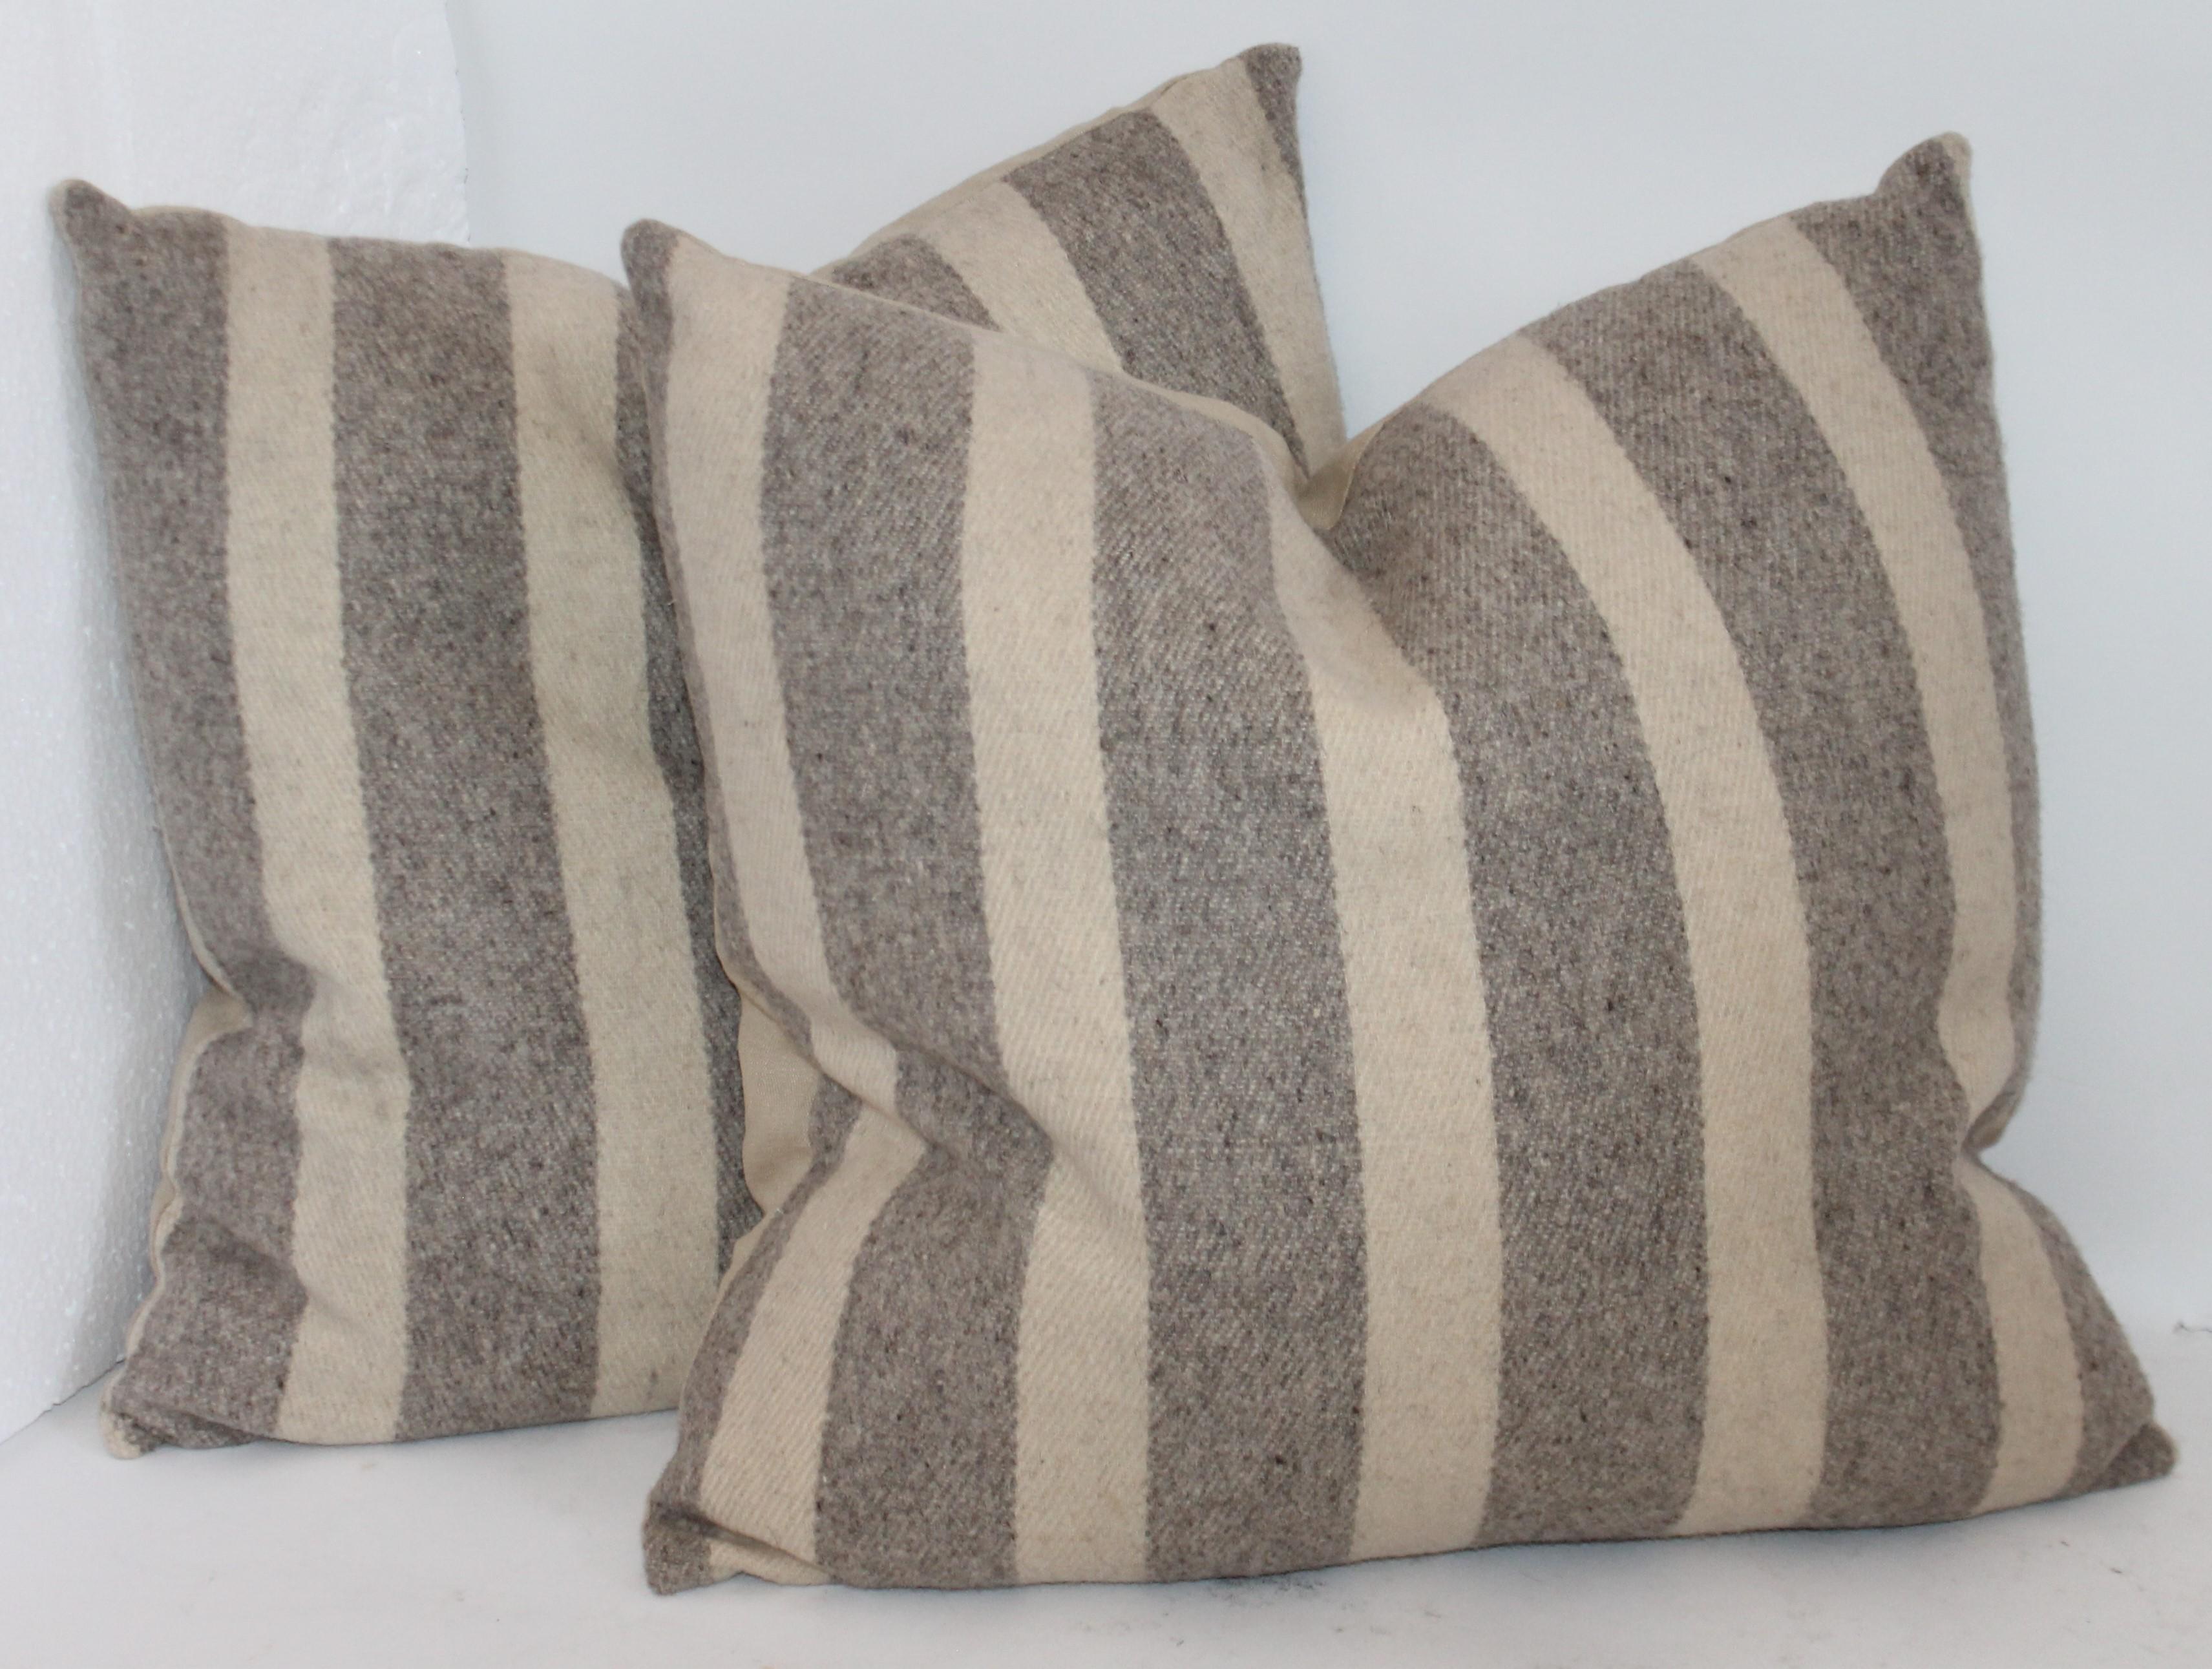 Cotton Collection of Wool Plaid Pillows, Six Pillows Total